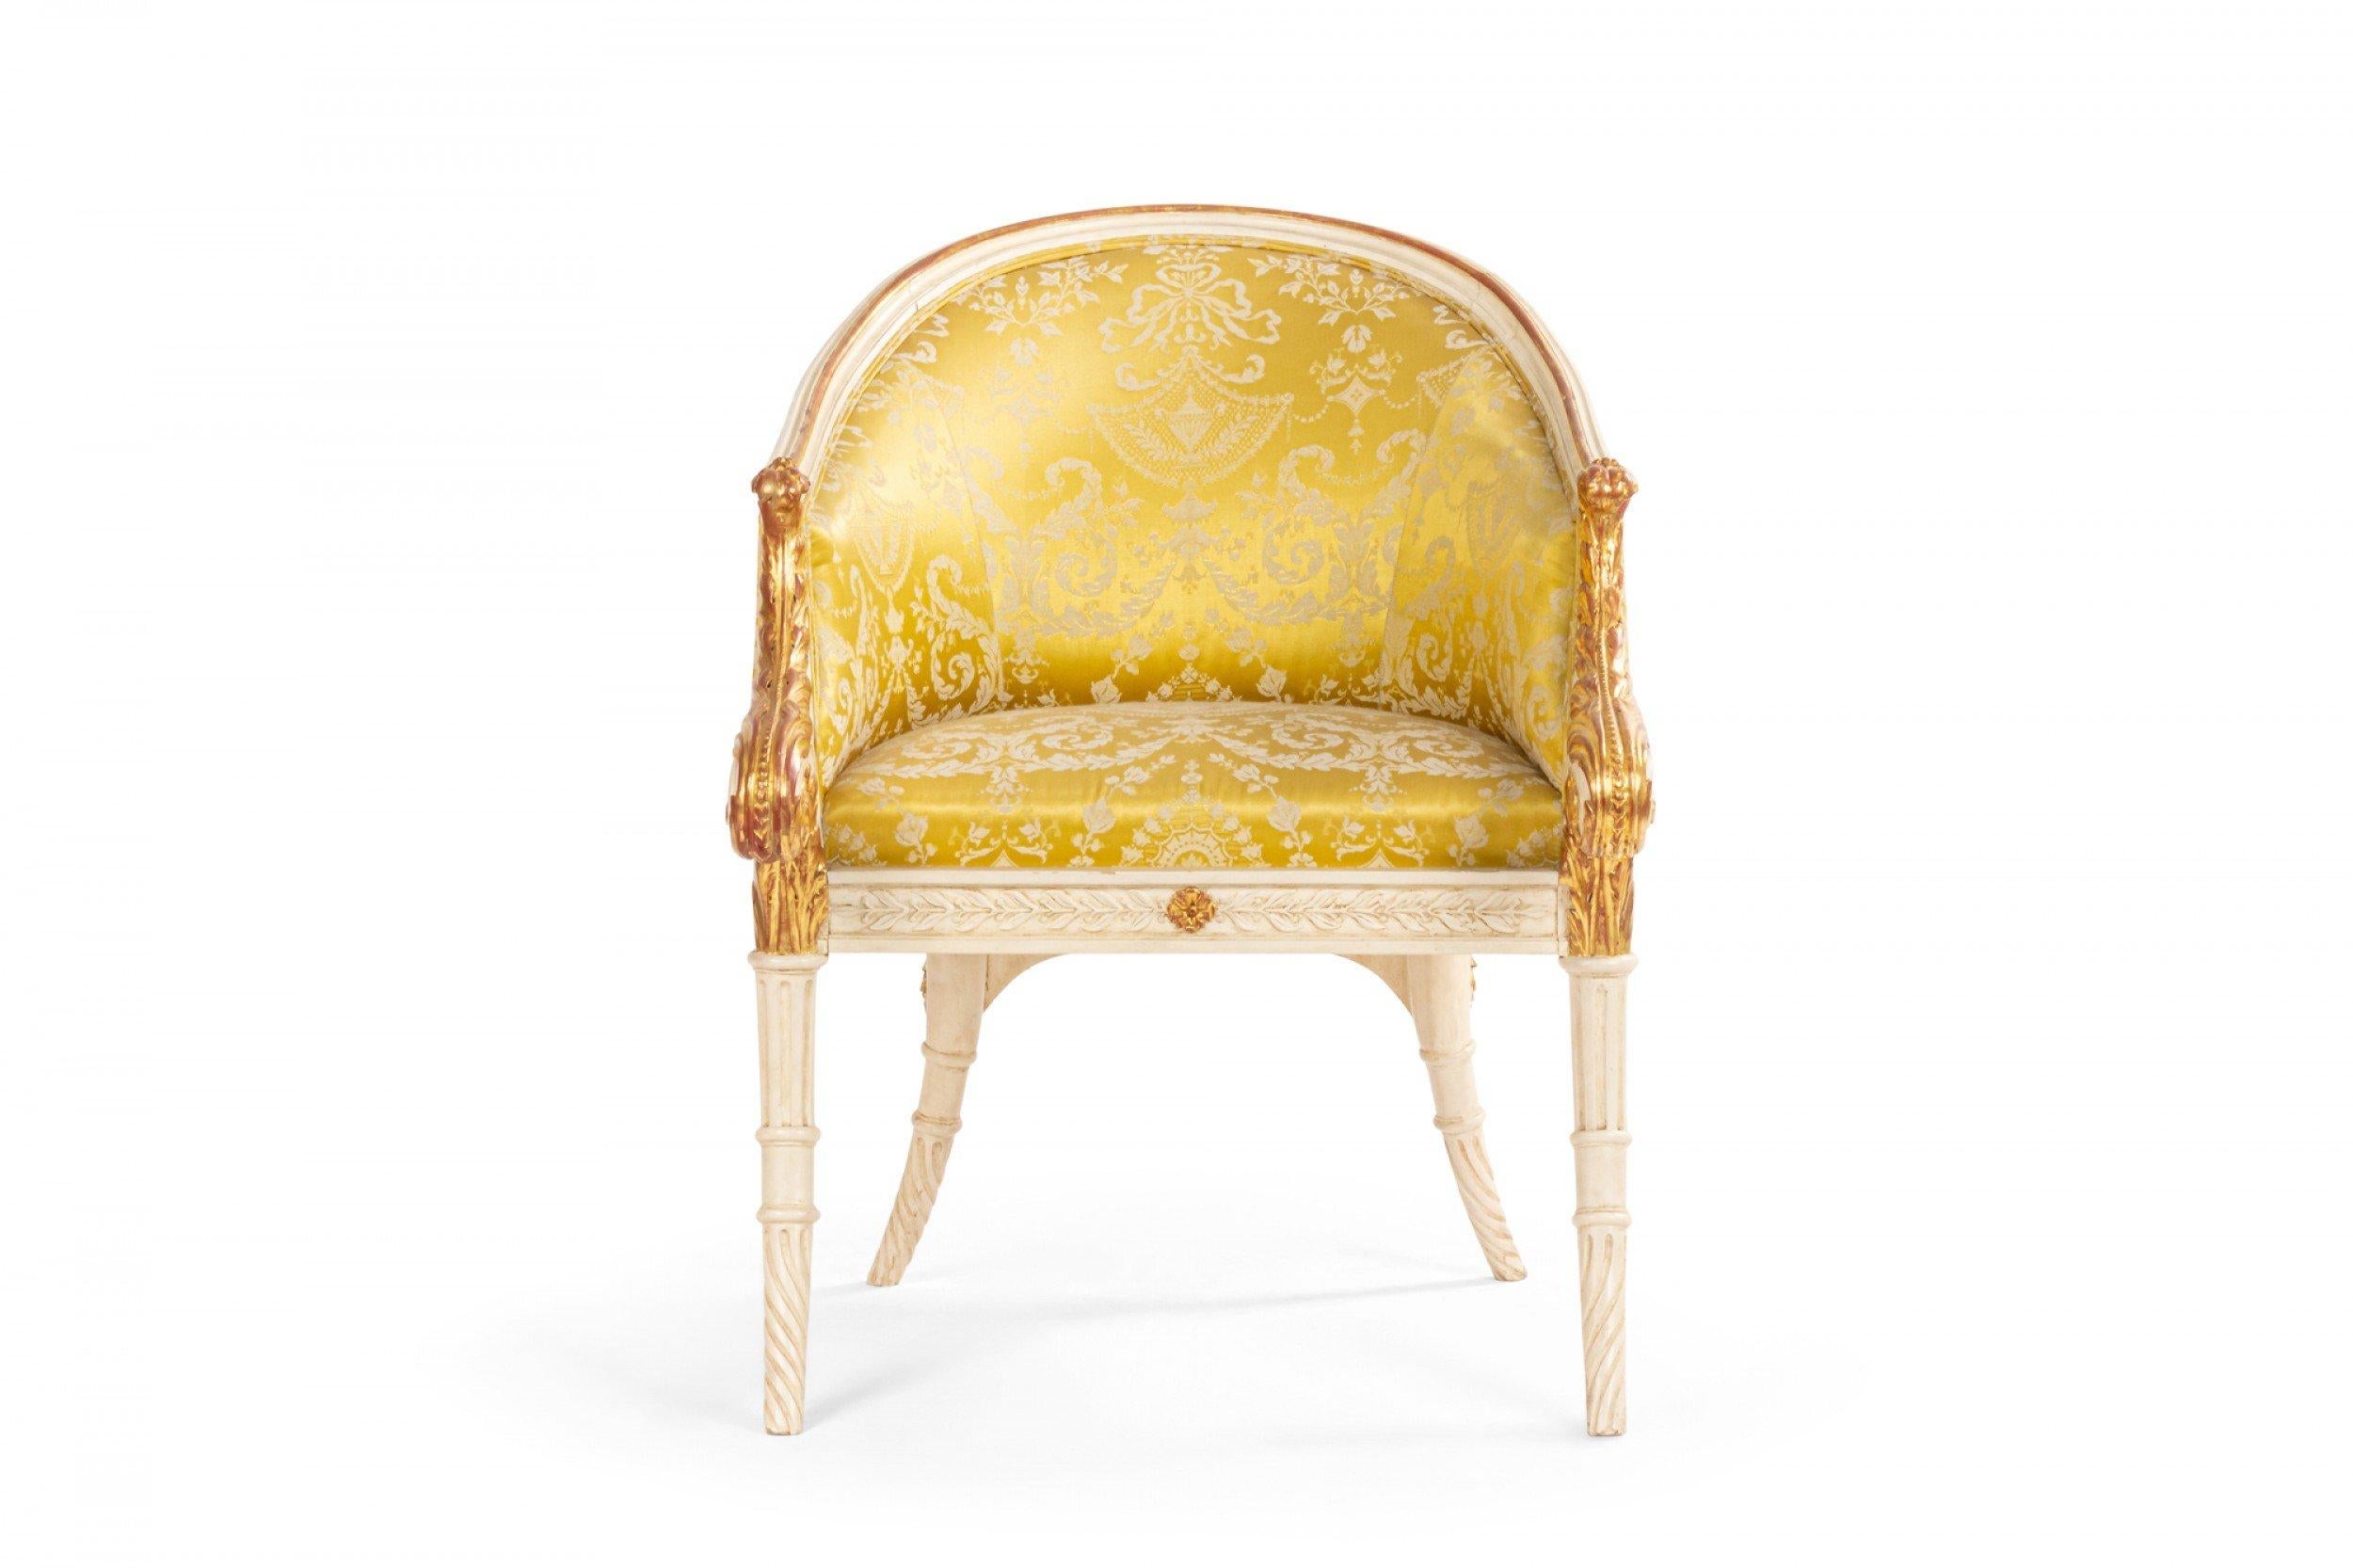 Neoclassical Italian Neo-Classic Style 19th Century White and Gold Arm Chair For Sale